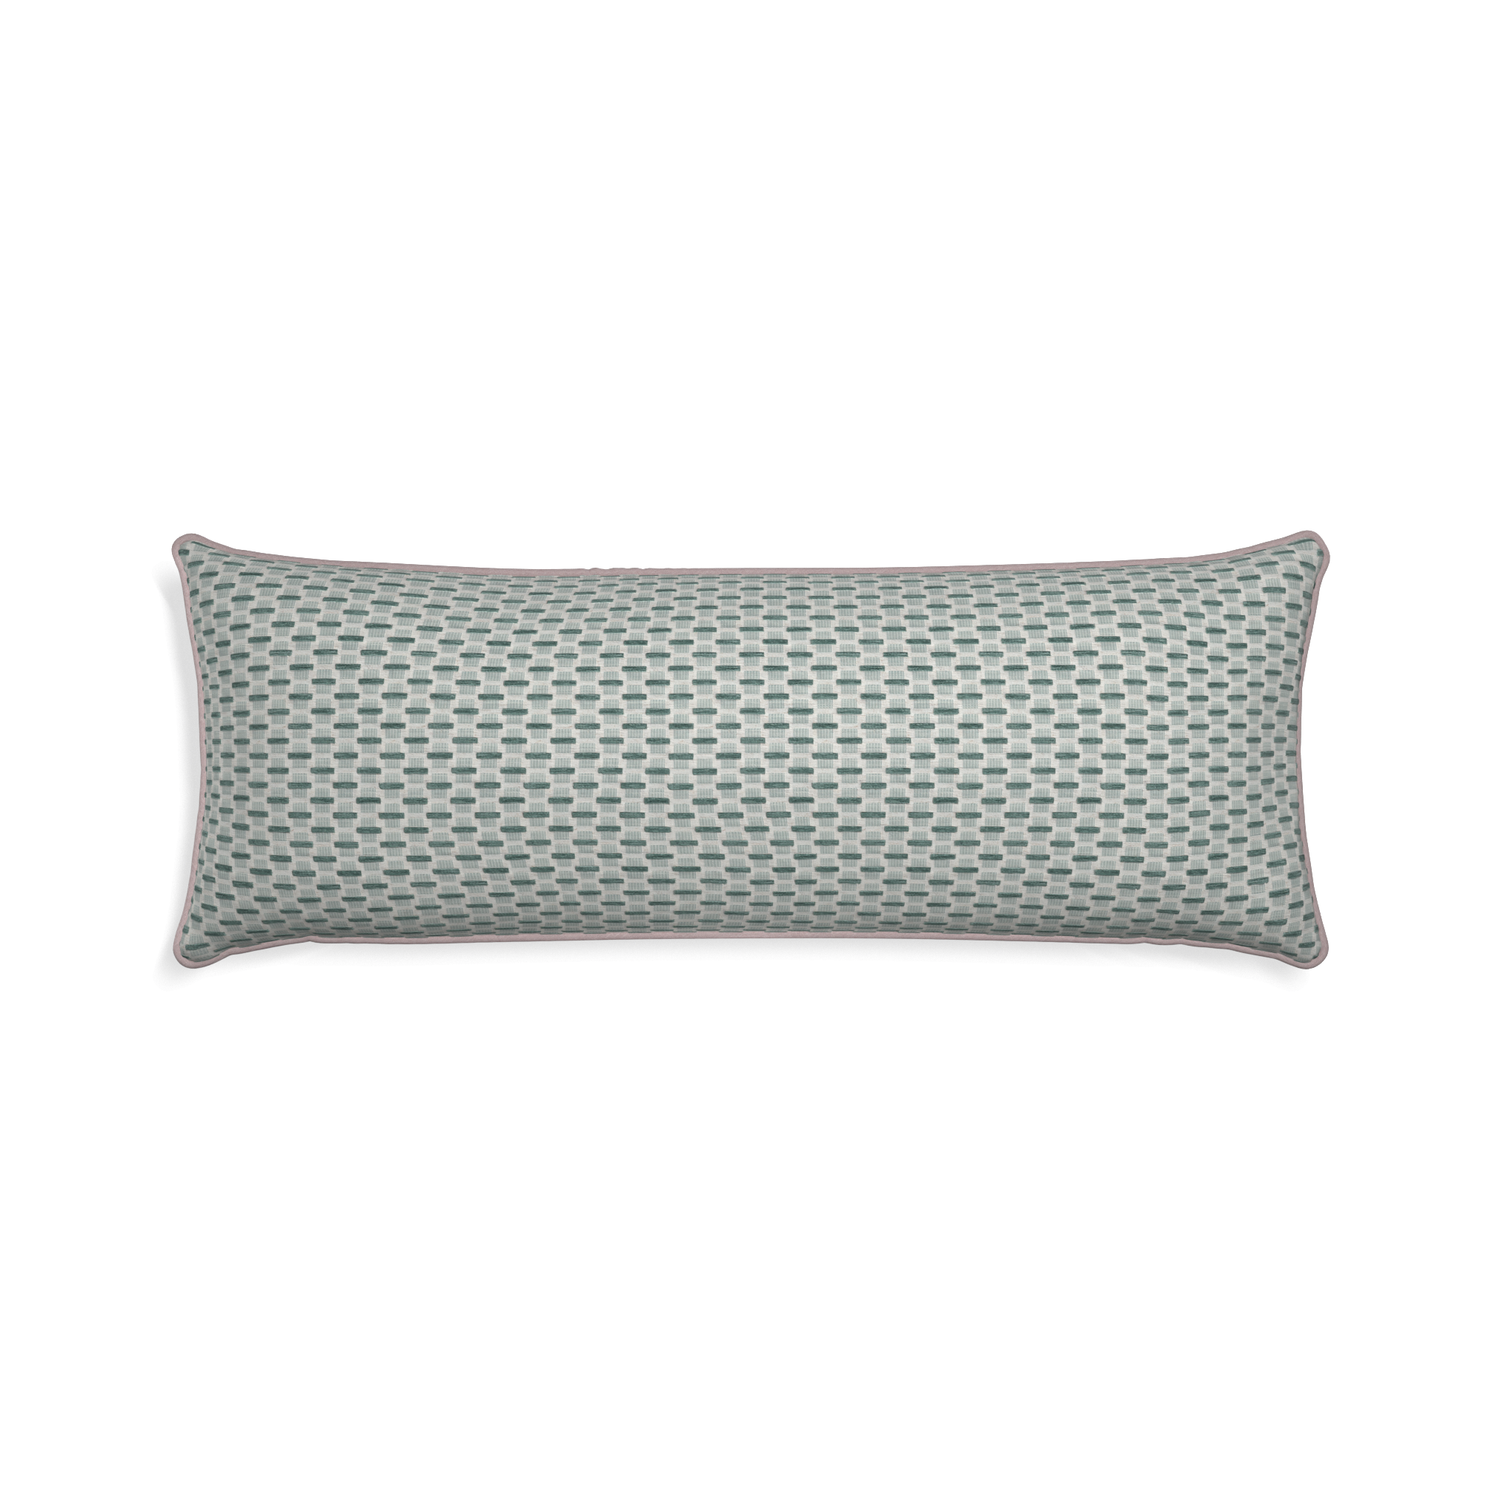 Xl-lumbar willow mint custom green geometric chenillepillow with orchid piping on white background